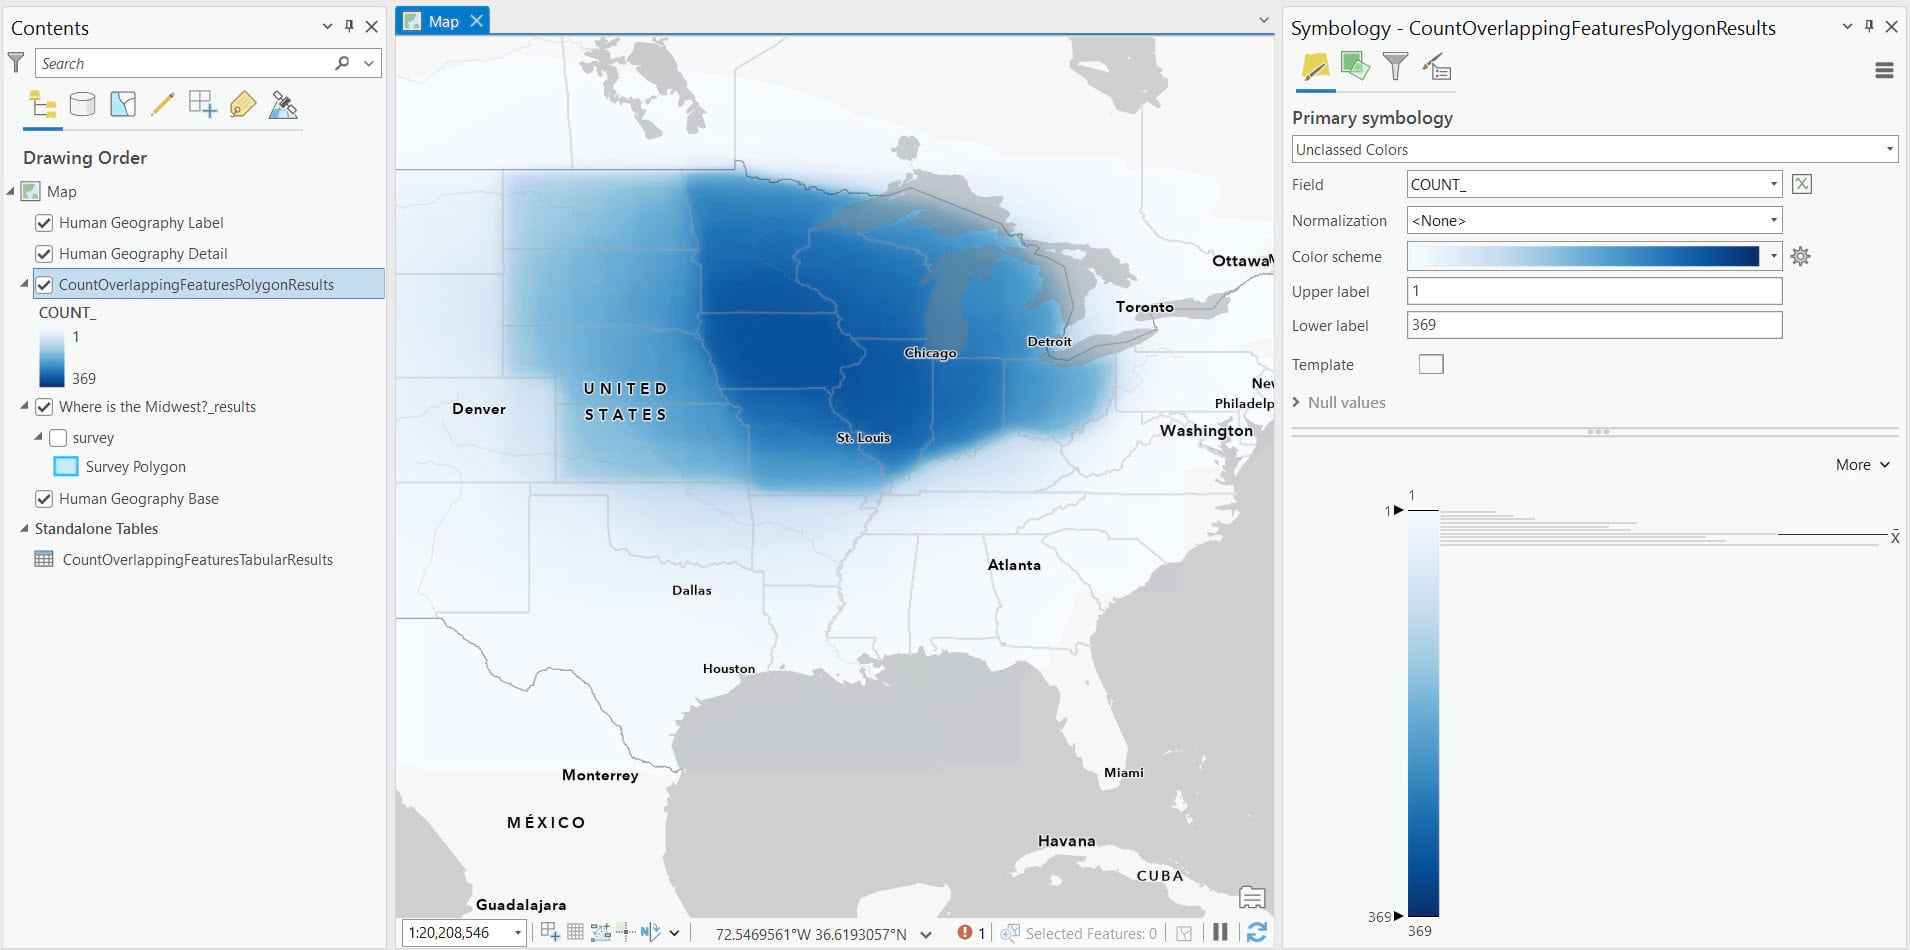 The symbology pane is open, showing the high-to-low color ramp set with a max of 369. Now the blue on the map is much darker in some areas than it is in others. Darkest states on the map are Iowa and Illinois. The Dakotas, Nebraska, and Kansas are much lighter.